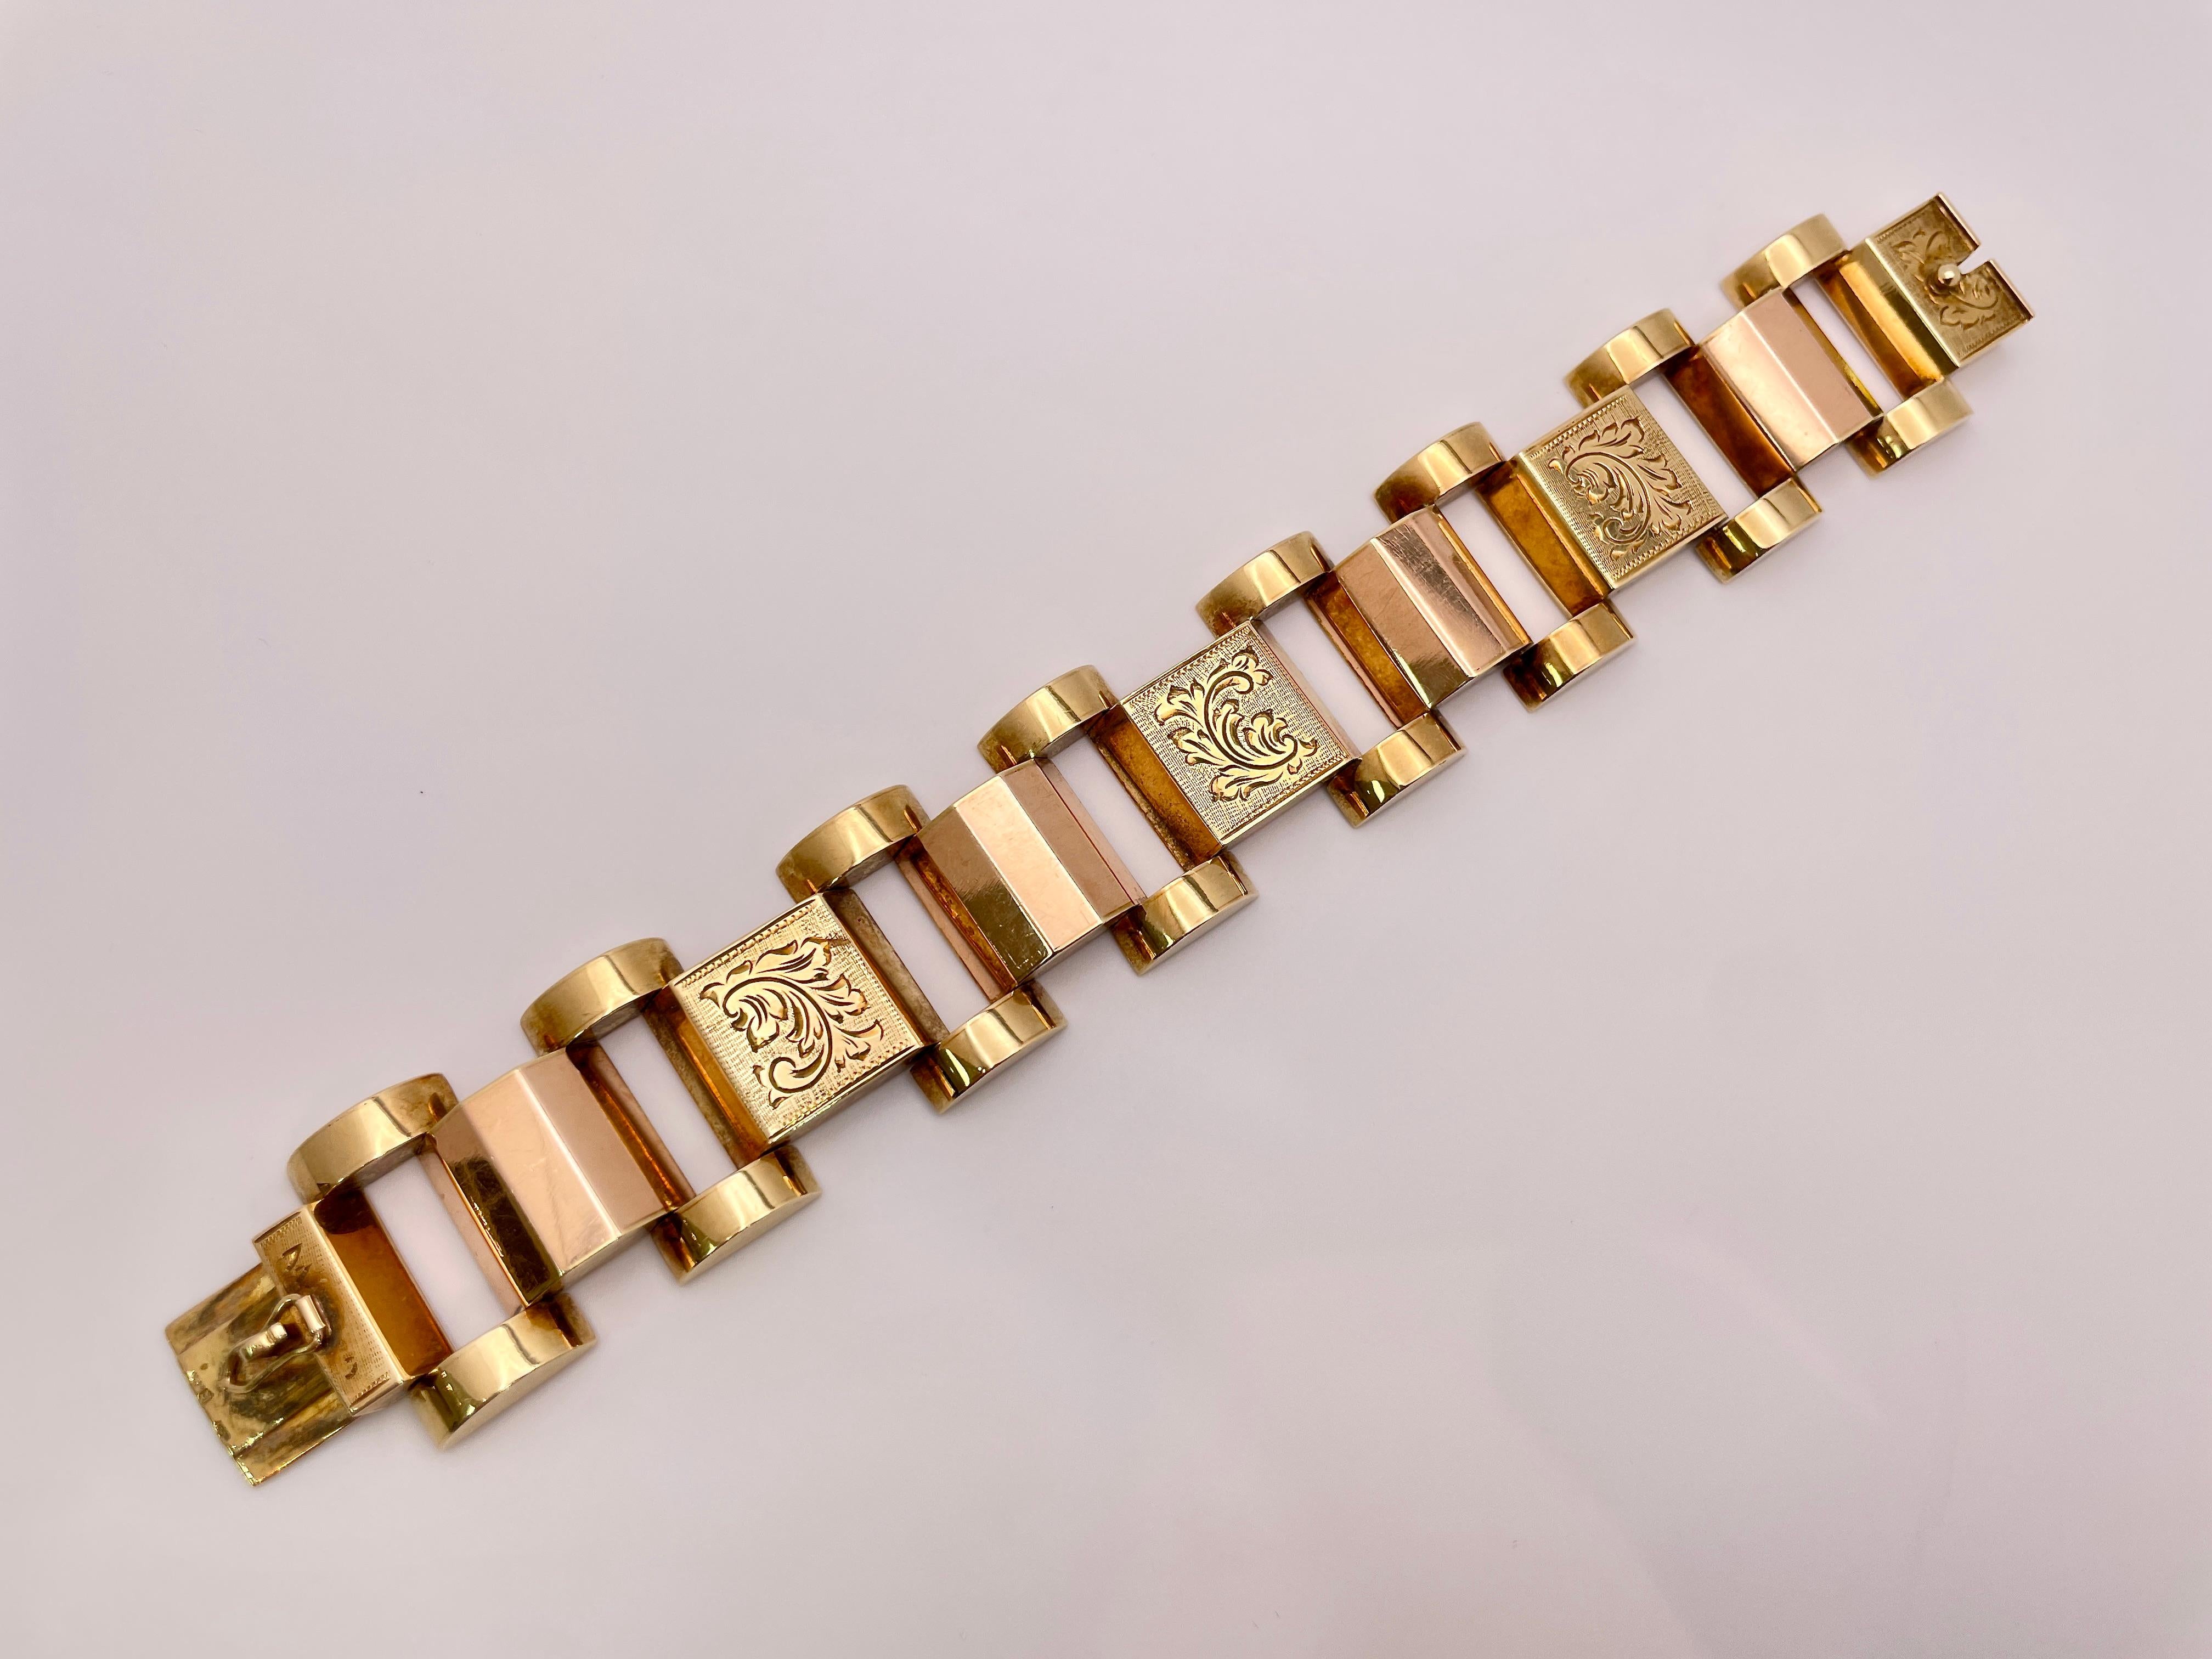 An original antique 14K yellow and rose gold wide link bracelet featuring a floral motif design, Circa 1930's.   This beautiful bracelet measures 7.50 inches length and 1.25 inches in width, with a gross weight of 91 grams. Embrace timeless elegance